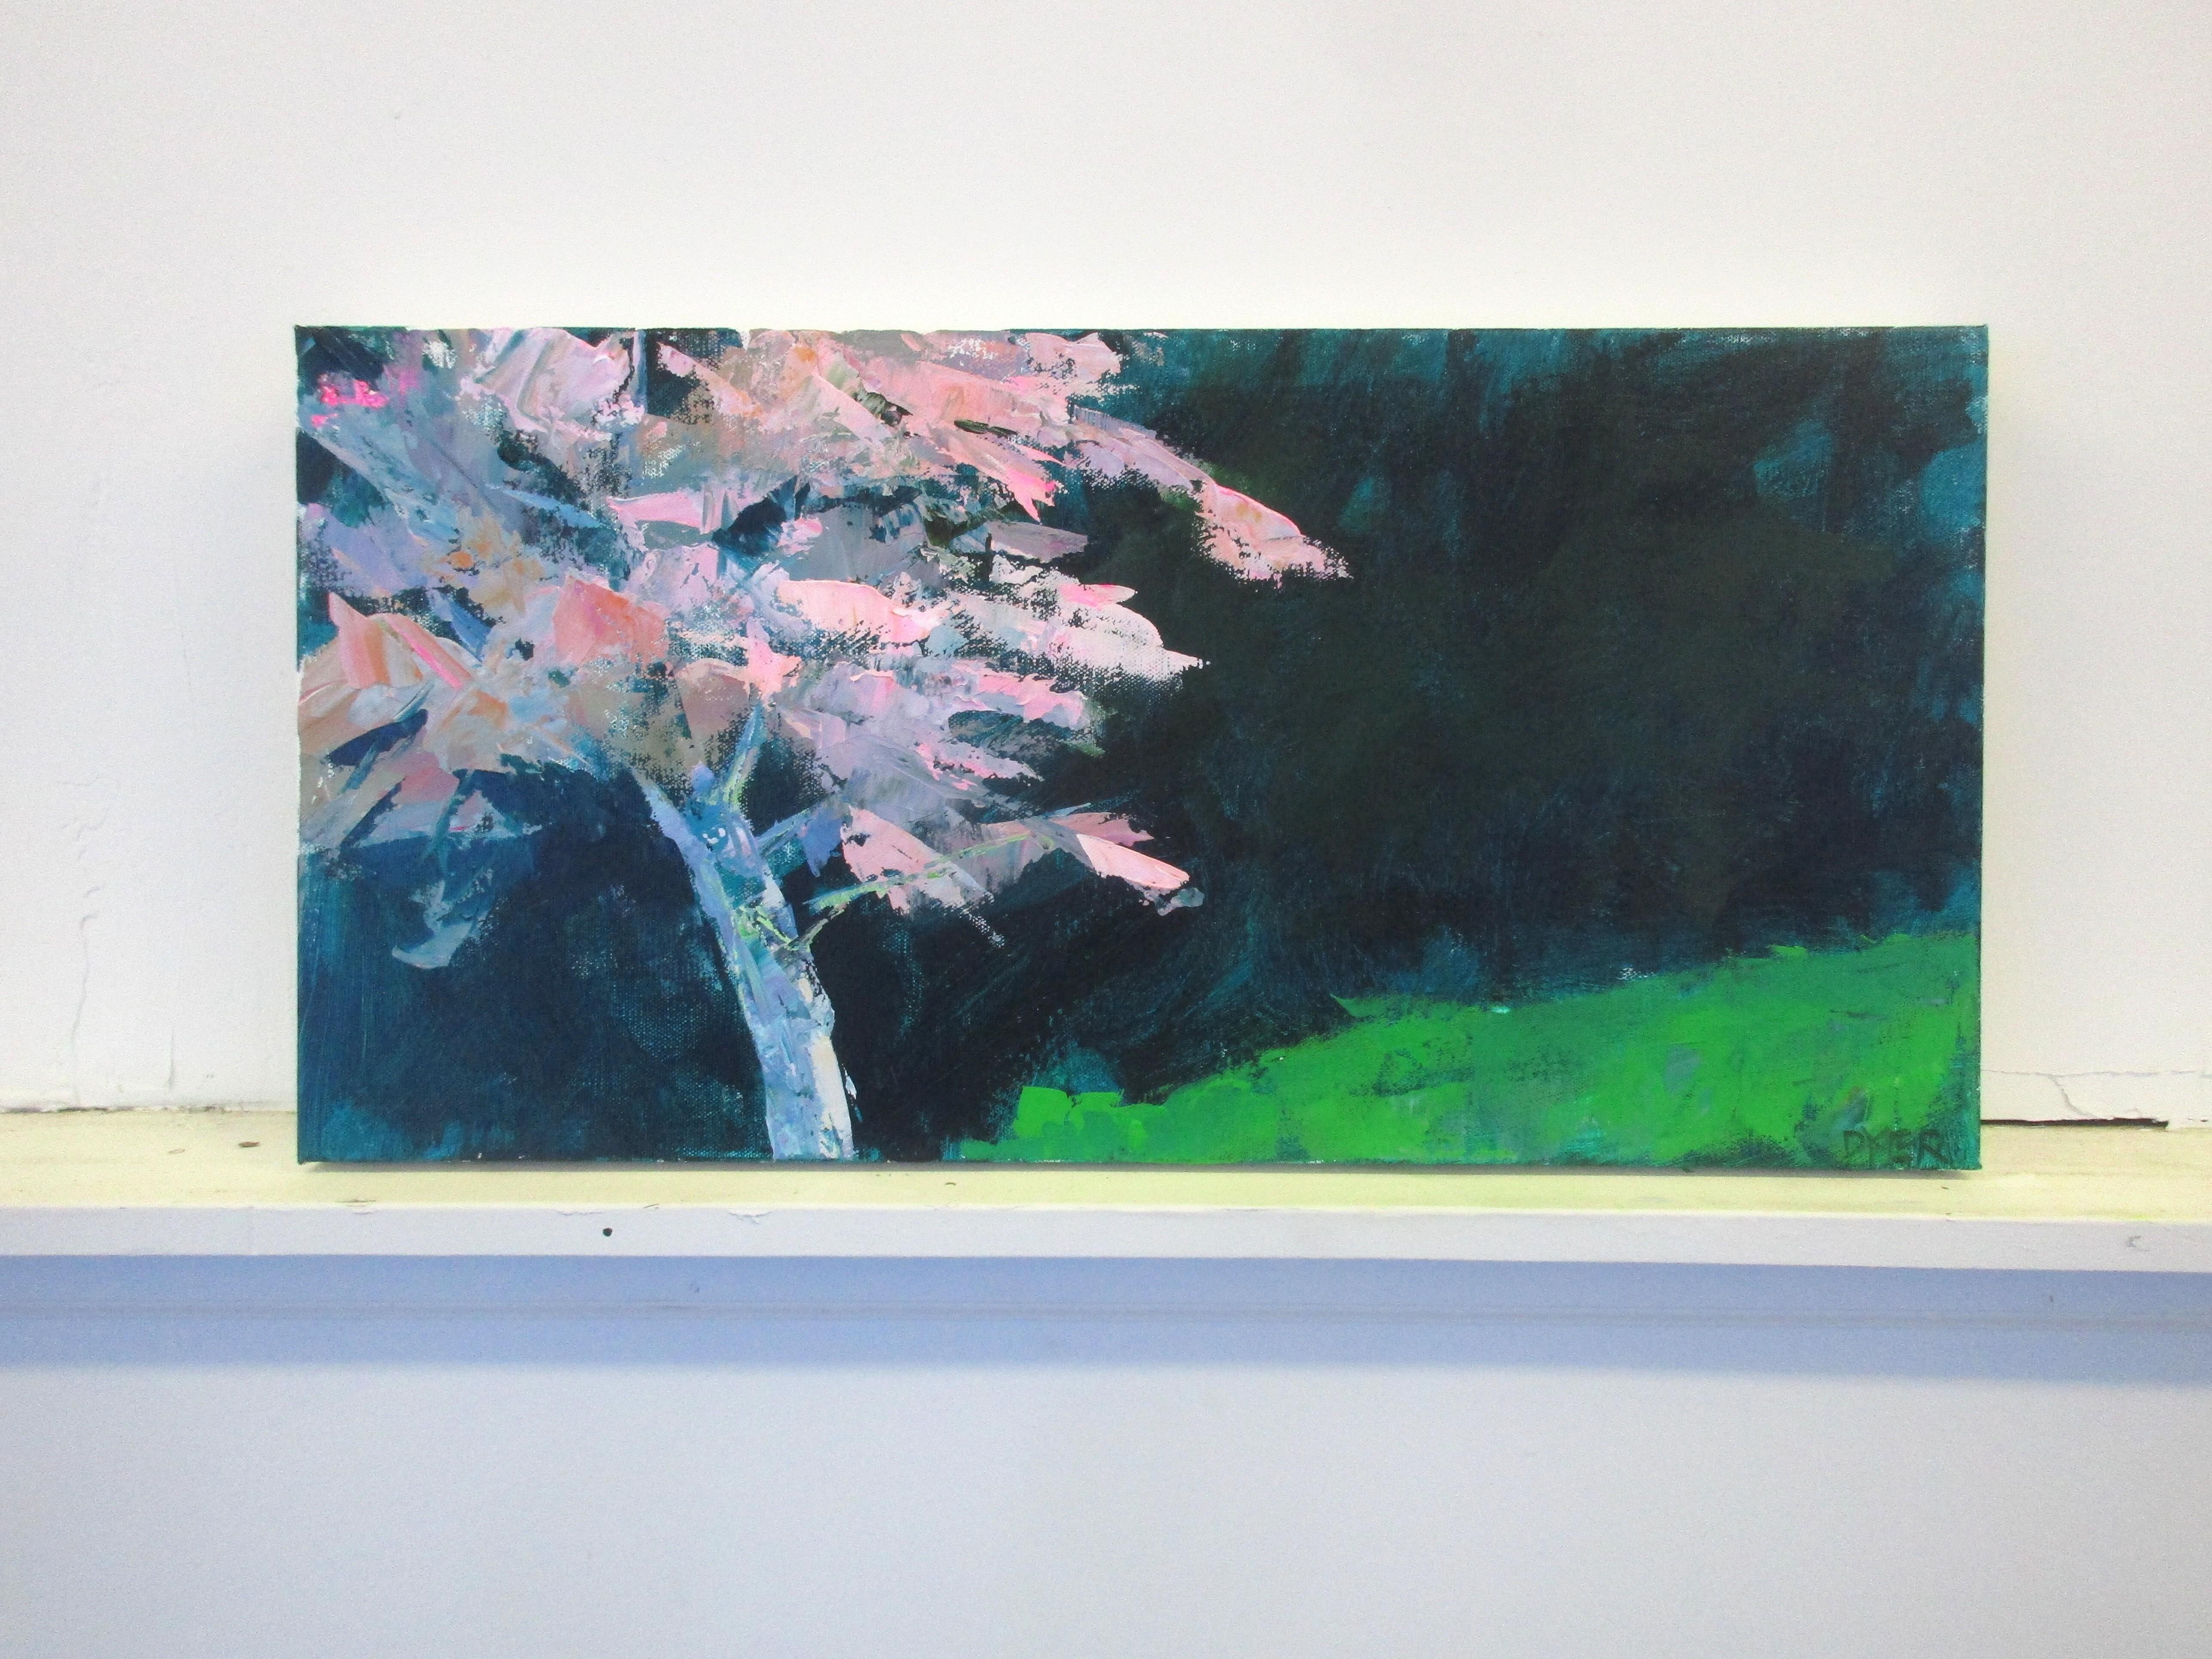 <p>Artist Comments<br>An homage to the blossoms and green grass of spring in the northeast. Simplified palette of greens and pink paired with the unique compositional balance set the gentle, poetic mood of the scene. Great detail suggested with an